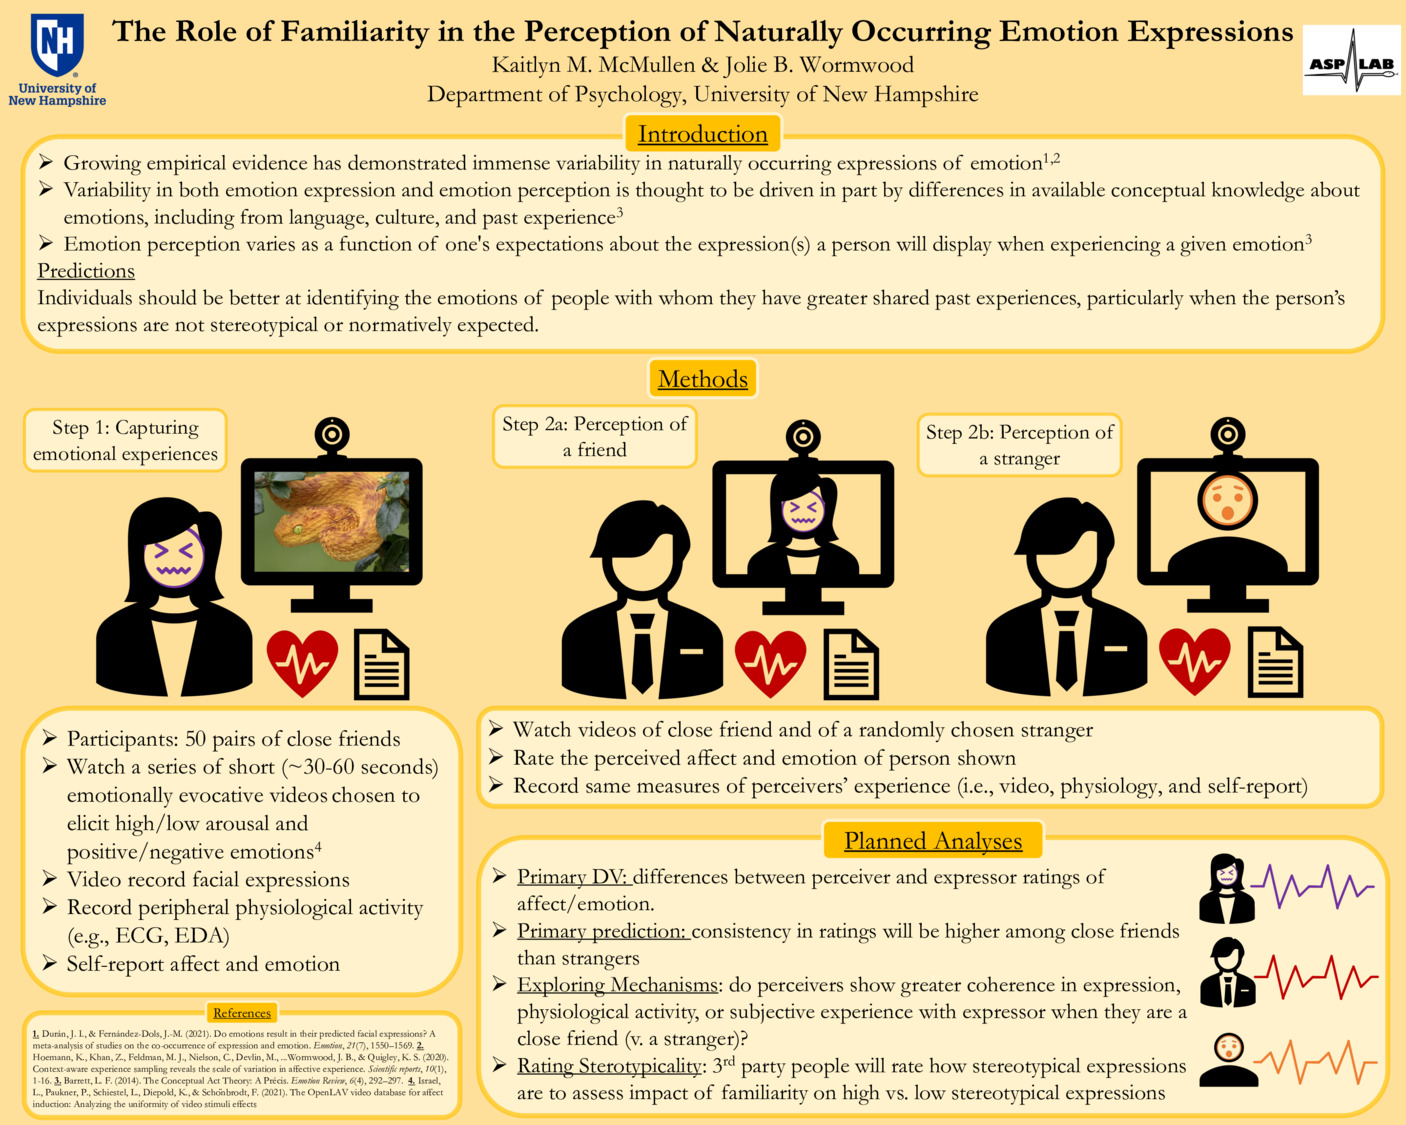 The Role Of Familiarity In The Perception Of Naturally Occurring Emotion Expressions by jbwormwood